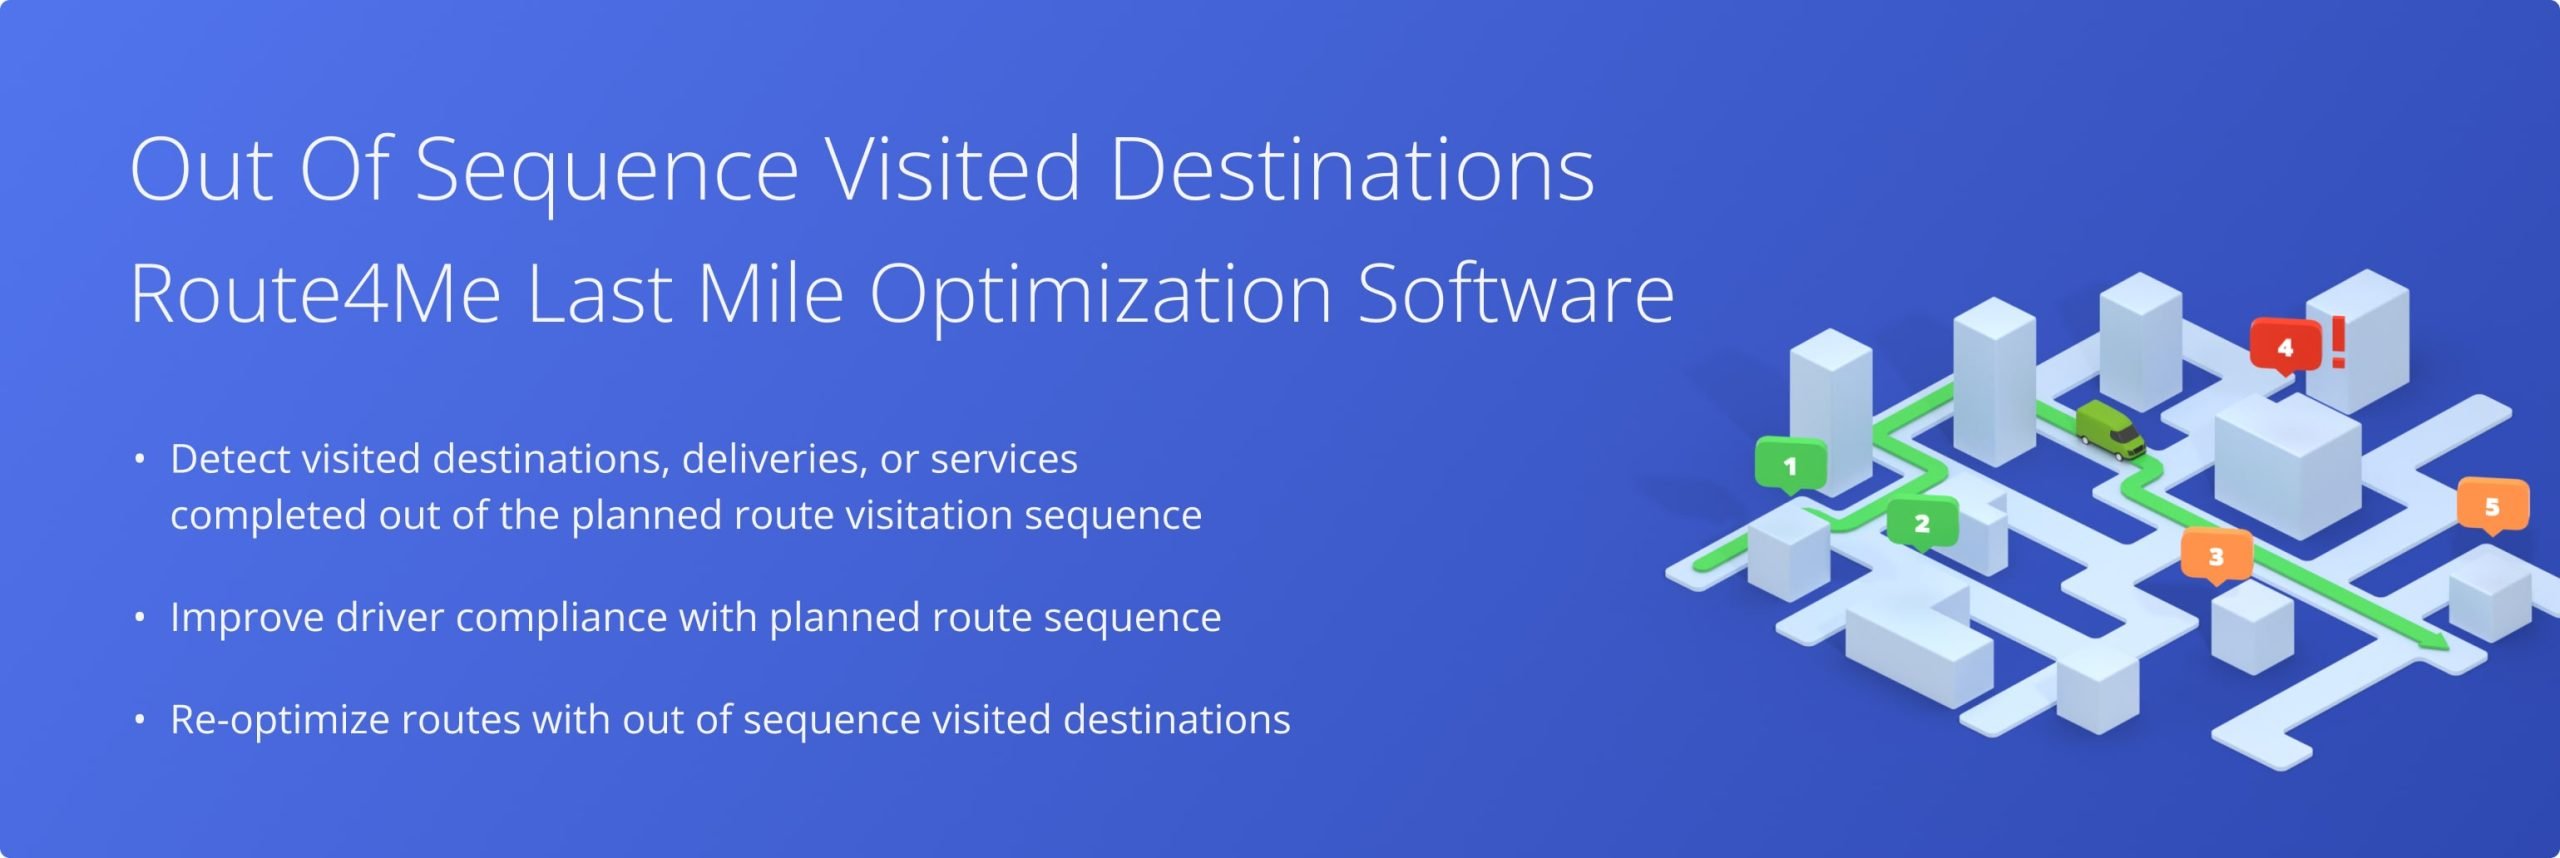 Track driver route compliance on routes with destinations visited out of the optimized visitation sequence. Then, re-optimize your out of sequence routes to ensure compliance and optimal routing.